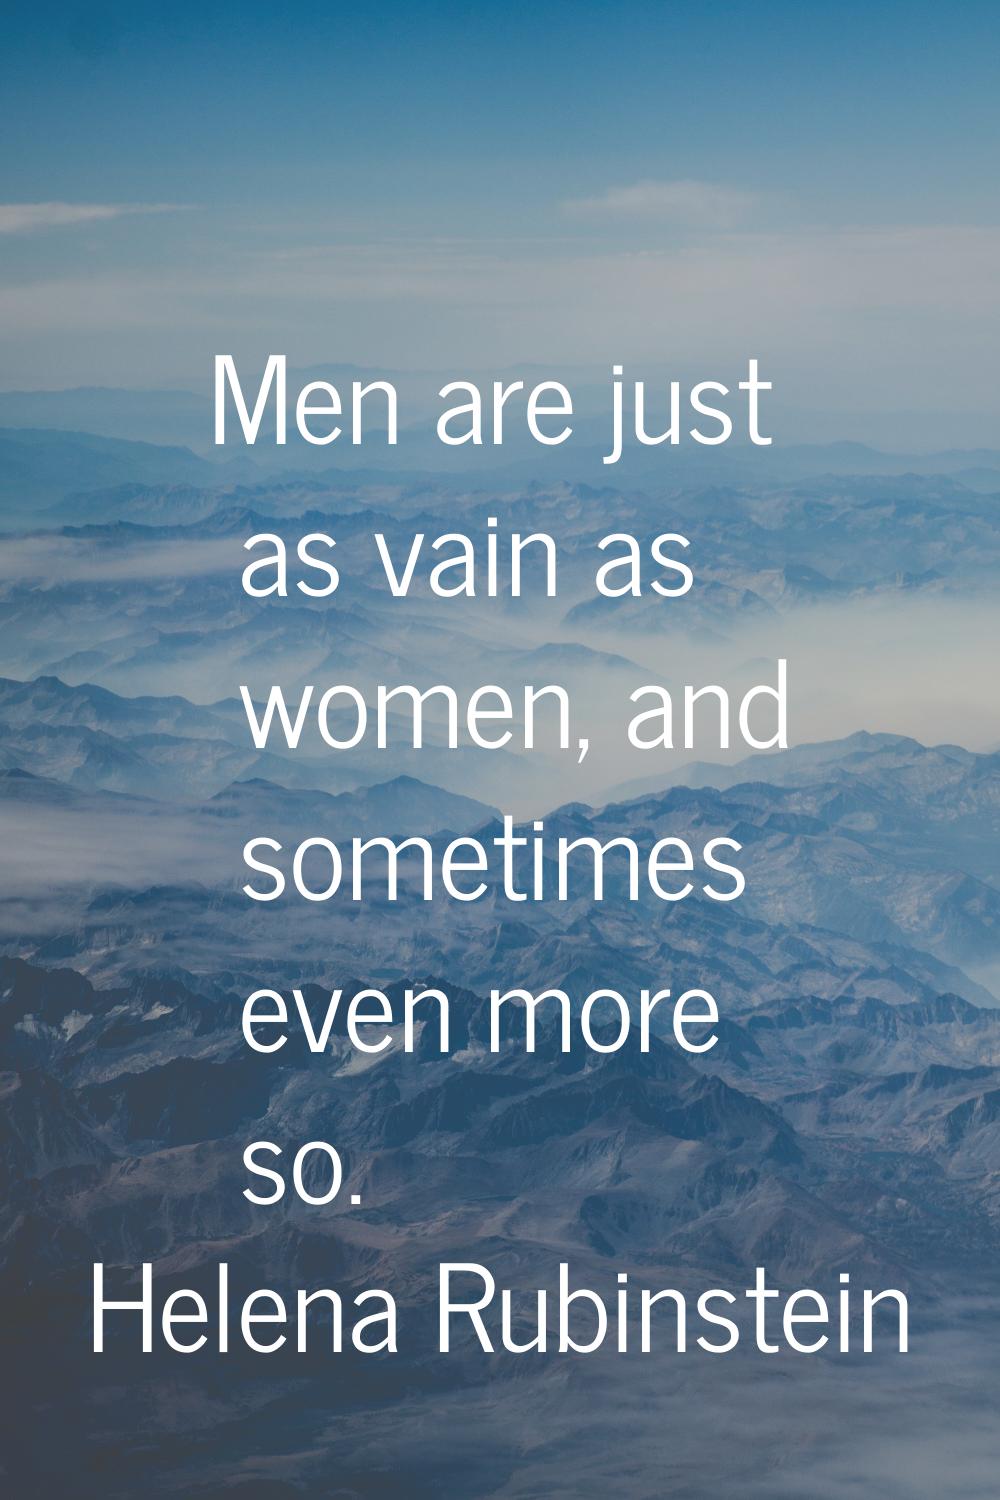 Men are just as vain as women, and sometimes even more so.